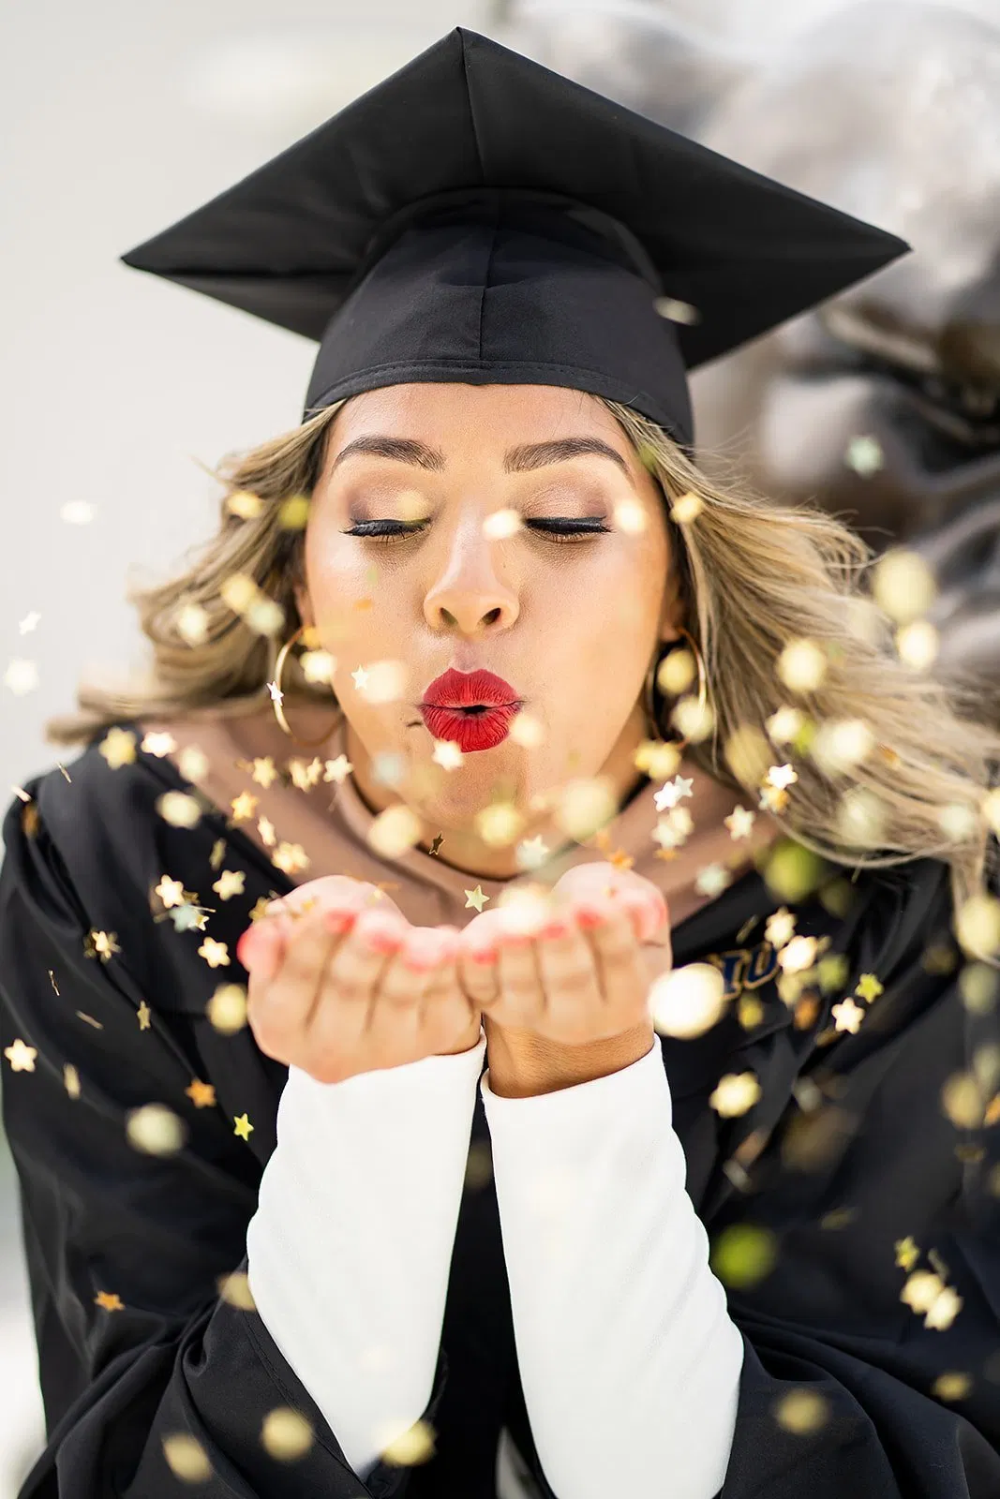 7 Simple Ideas That Can Spice Up Your Graduation Photoshoot